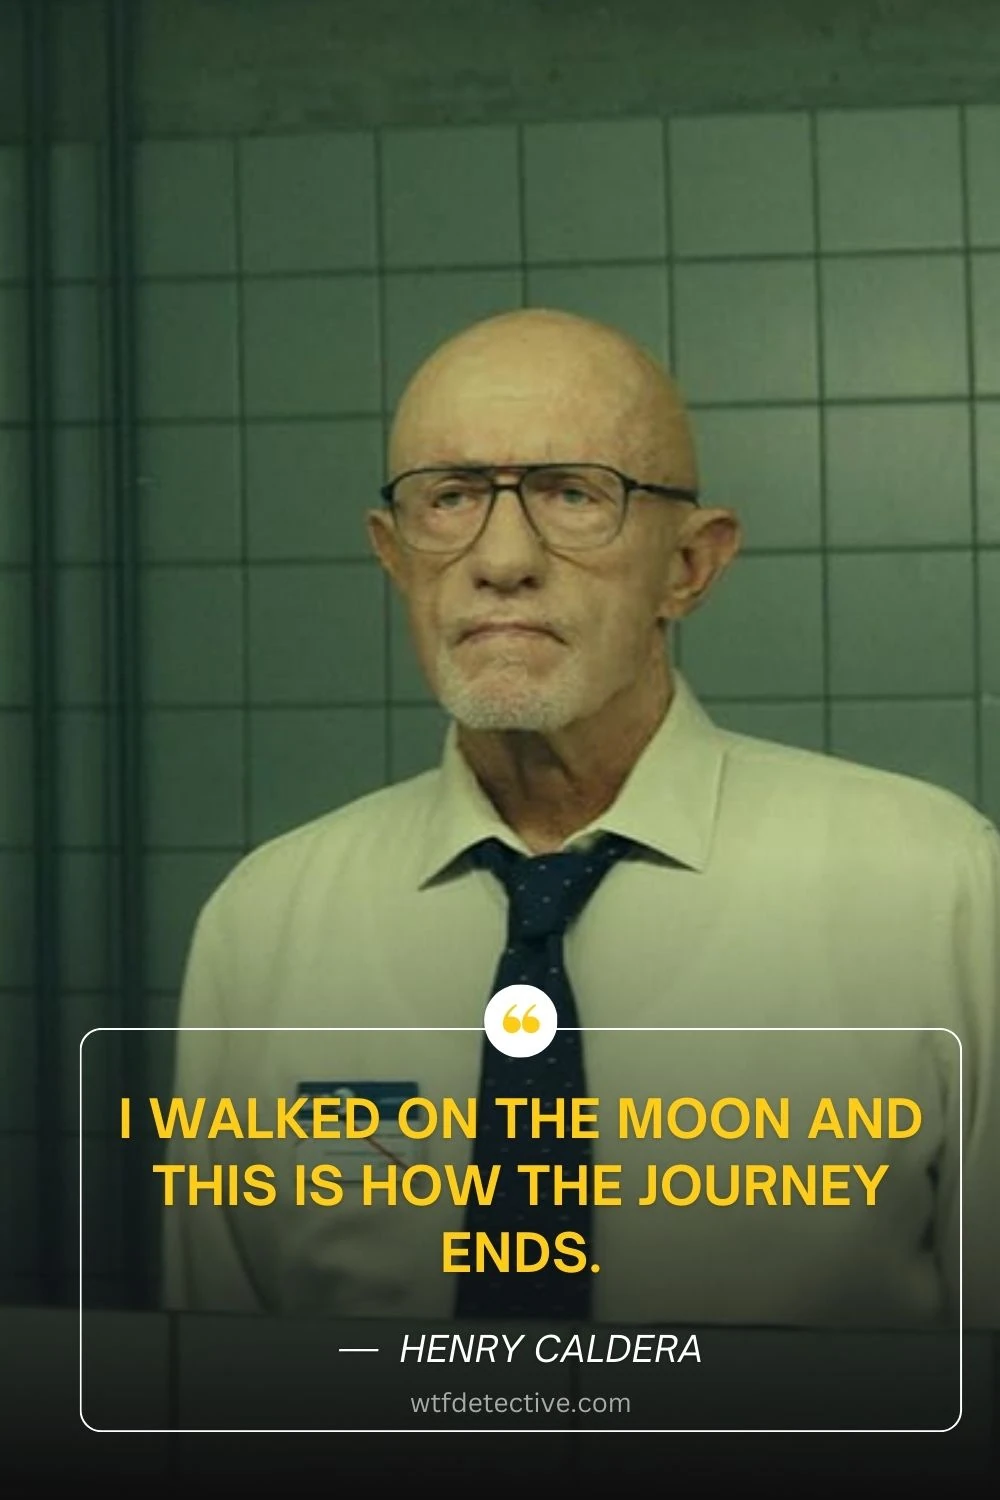 I walked on the moon quotes,  how the journey ends quote, henry caldera quotes, Jonathan Banks quote - Henry Caldera Constellation